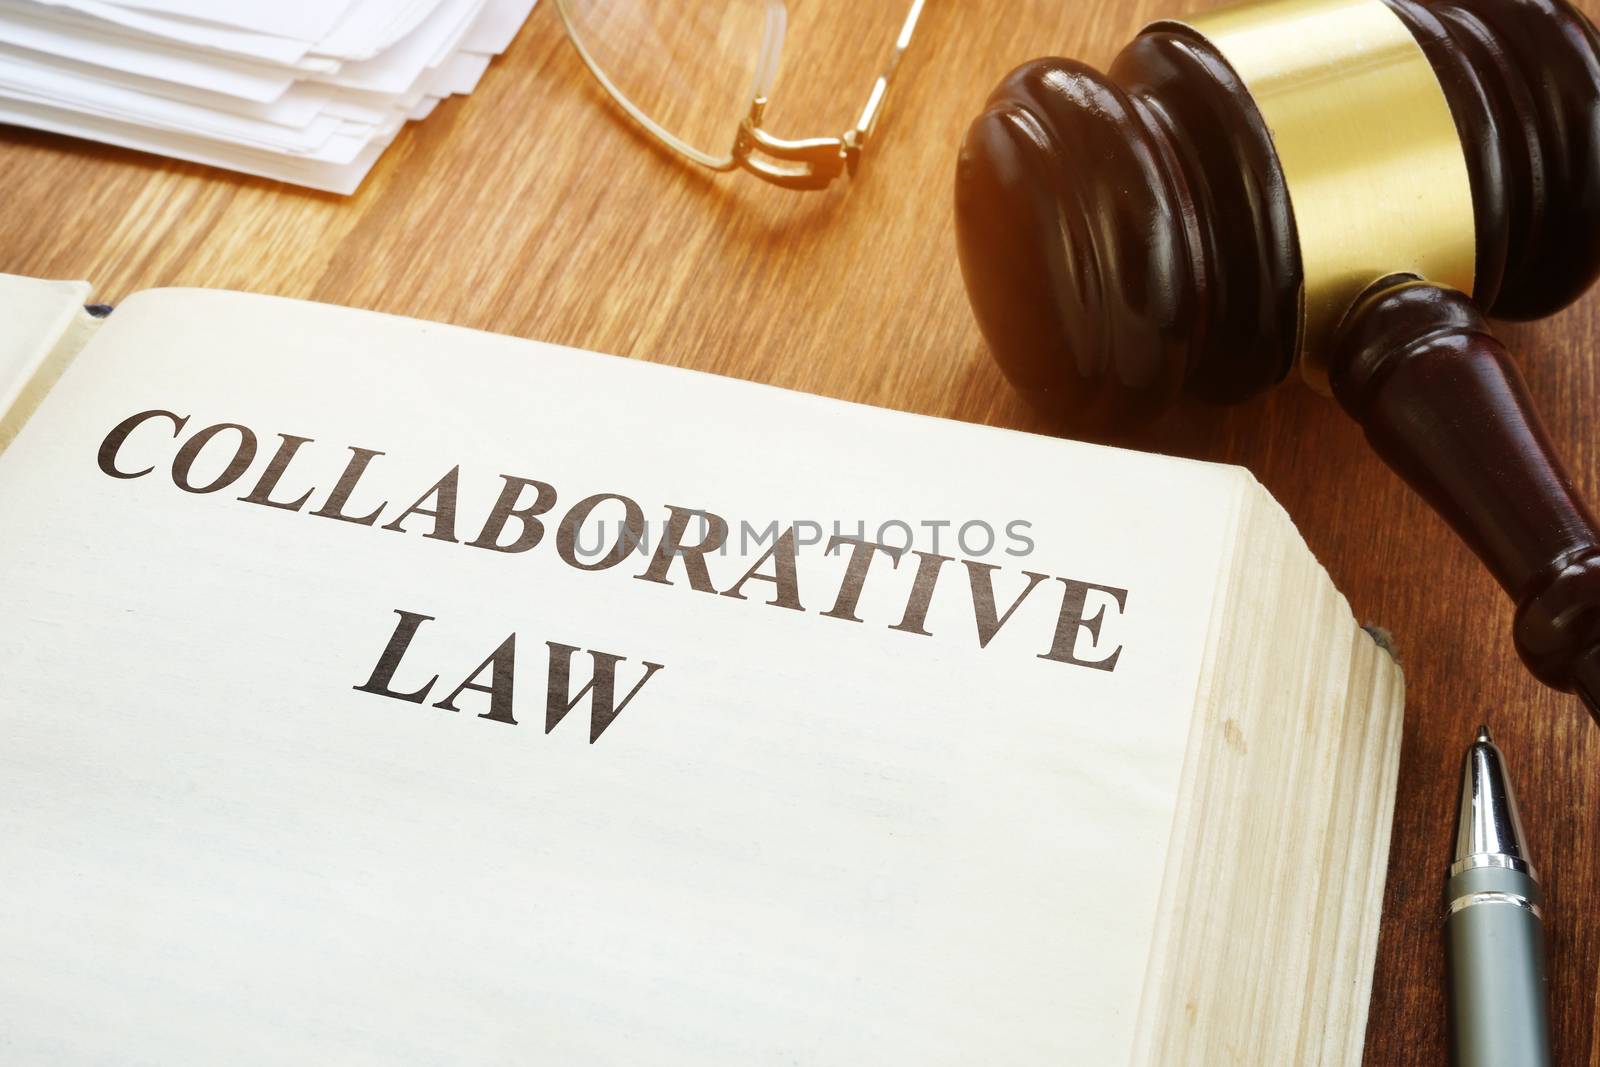 Collaborative law book, gavel and papers.